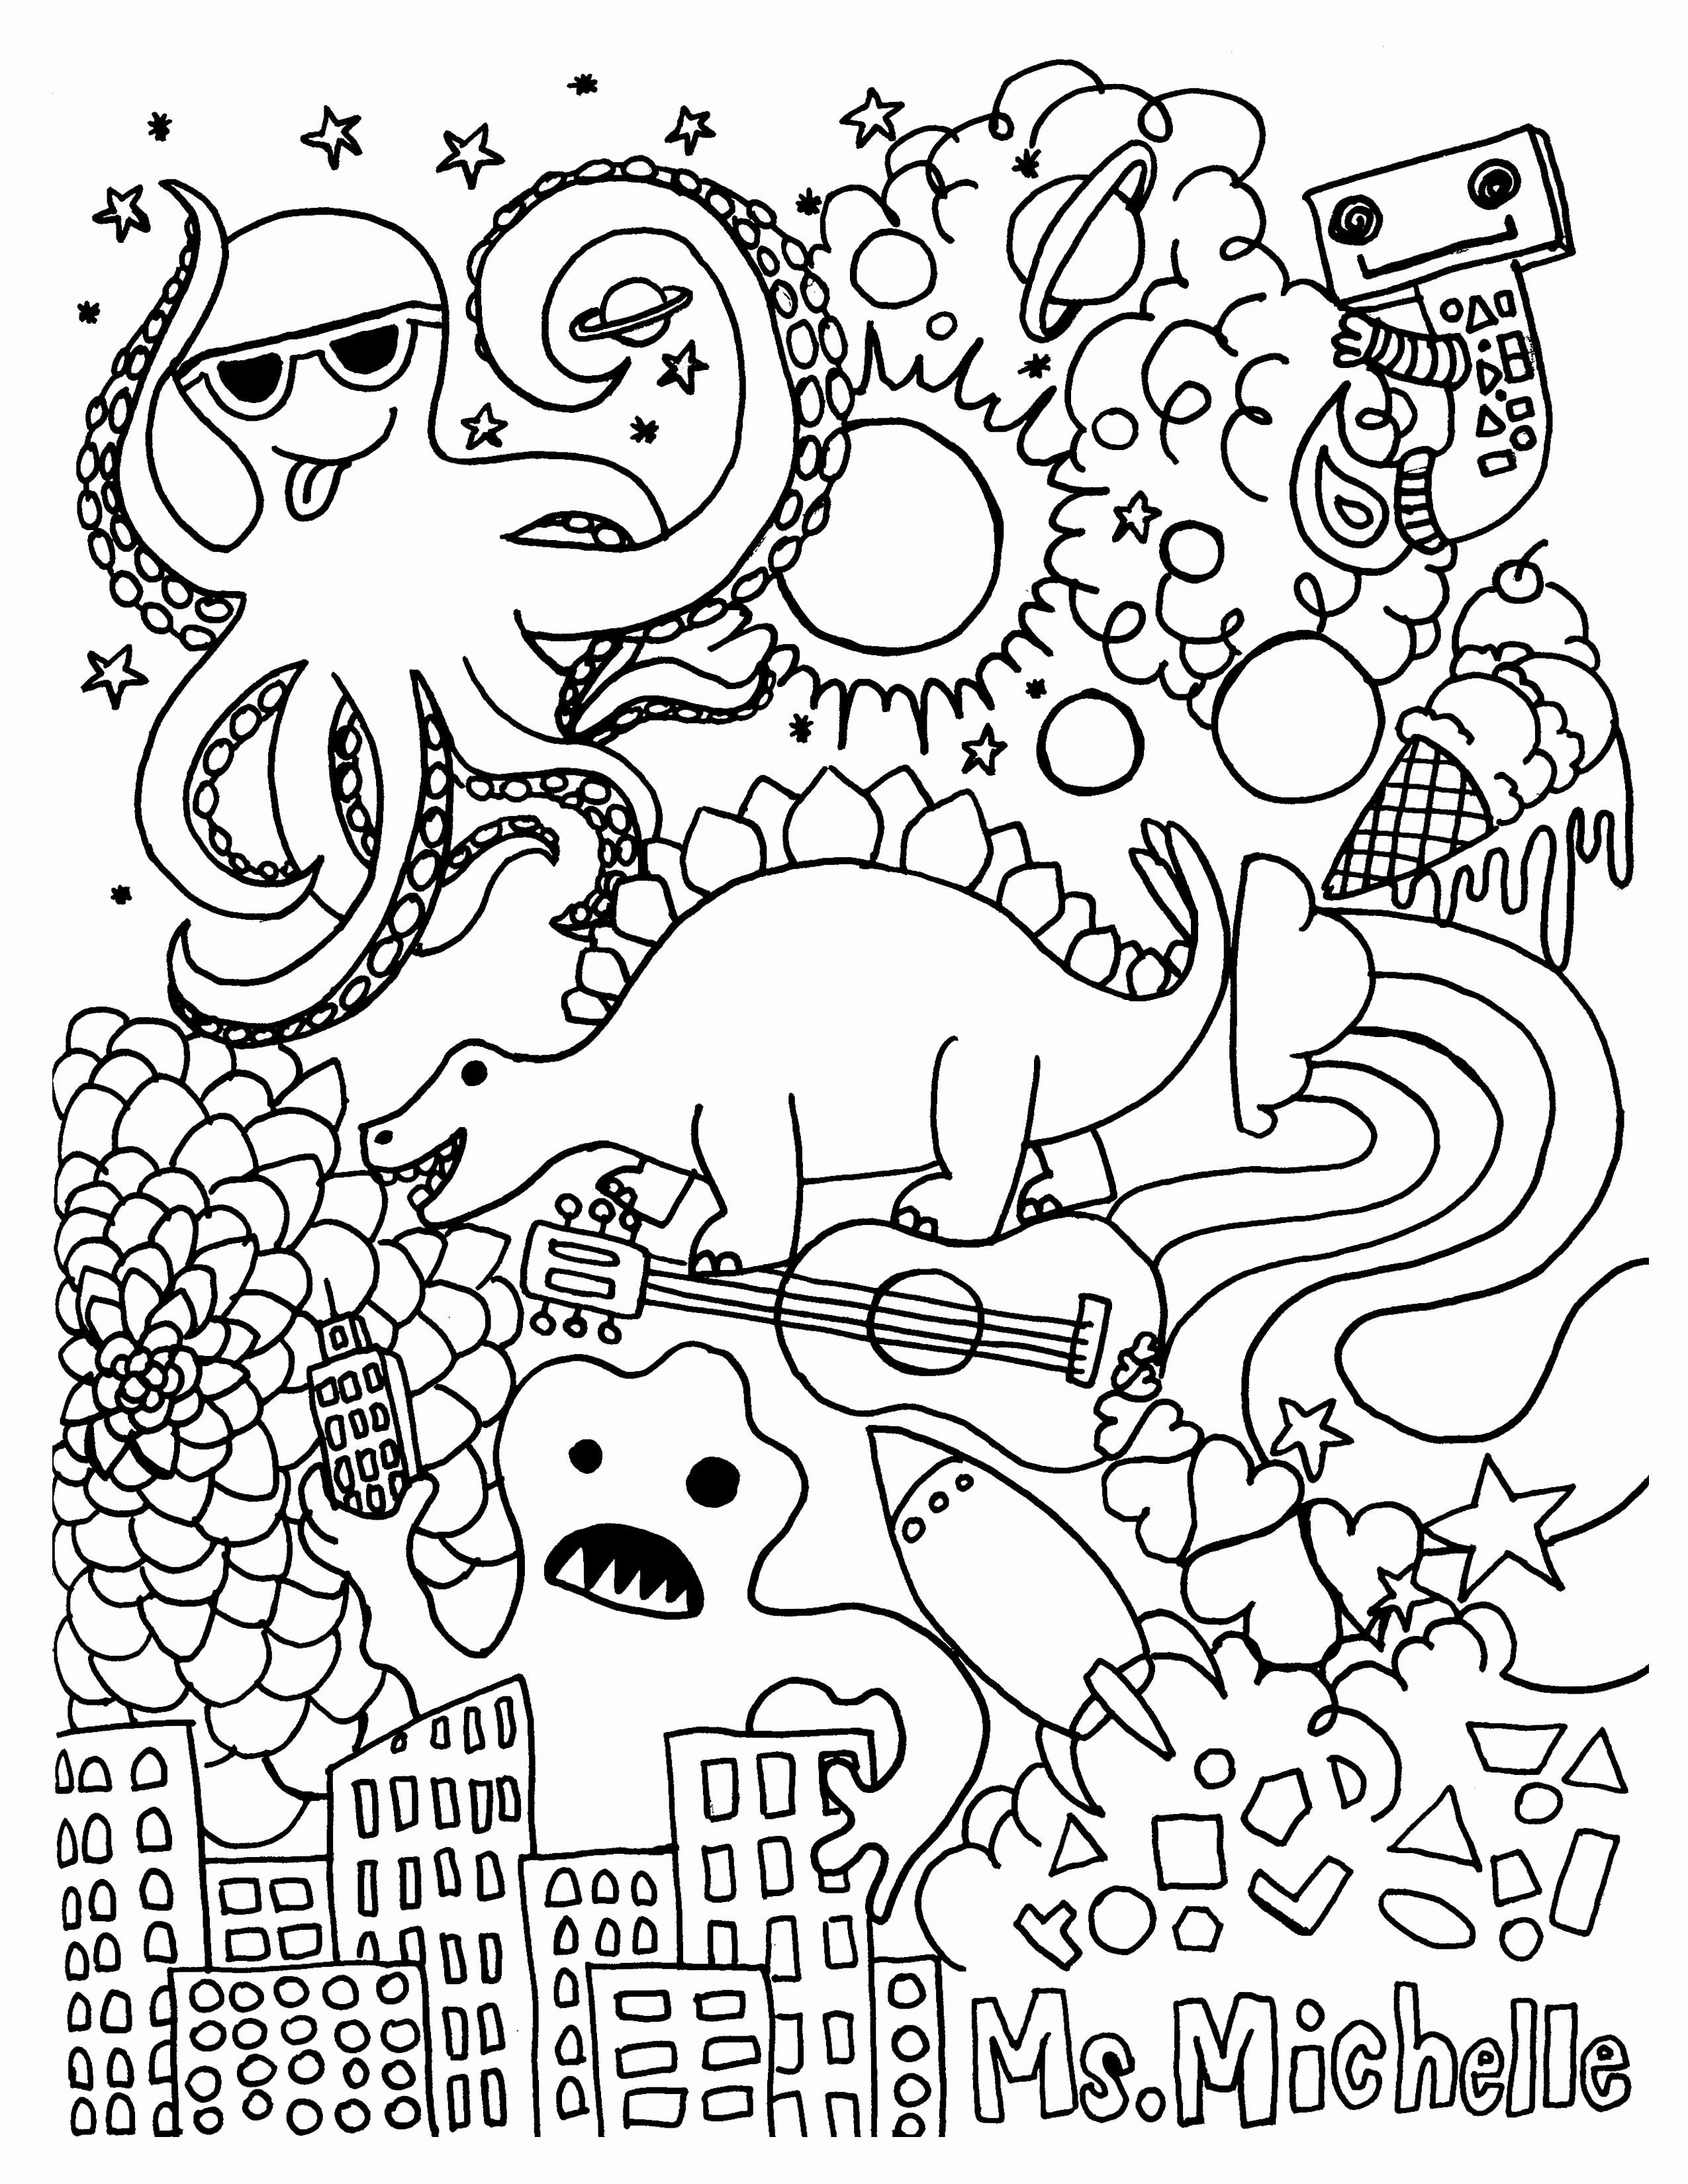 Customized Coloring Pages Coloring Pages State Of Mississippi Coloring Sheets Luxury